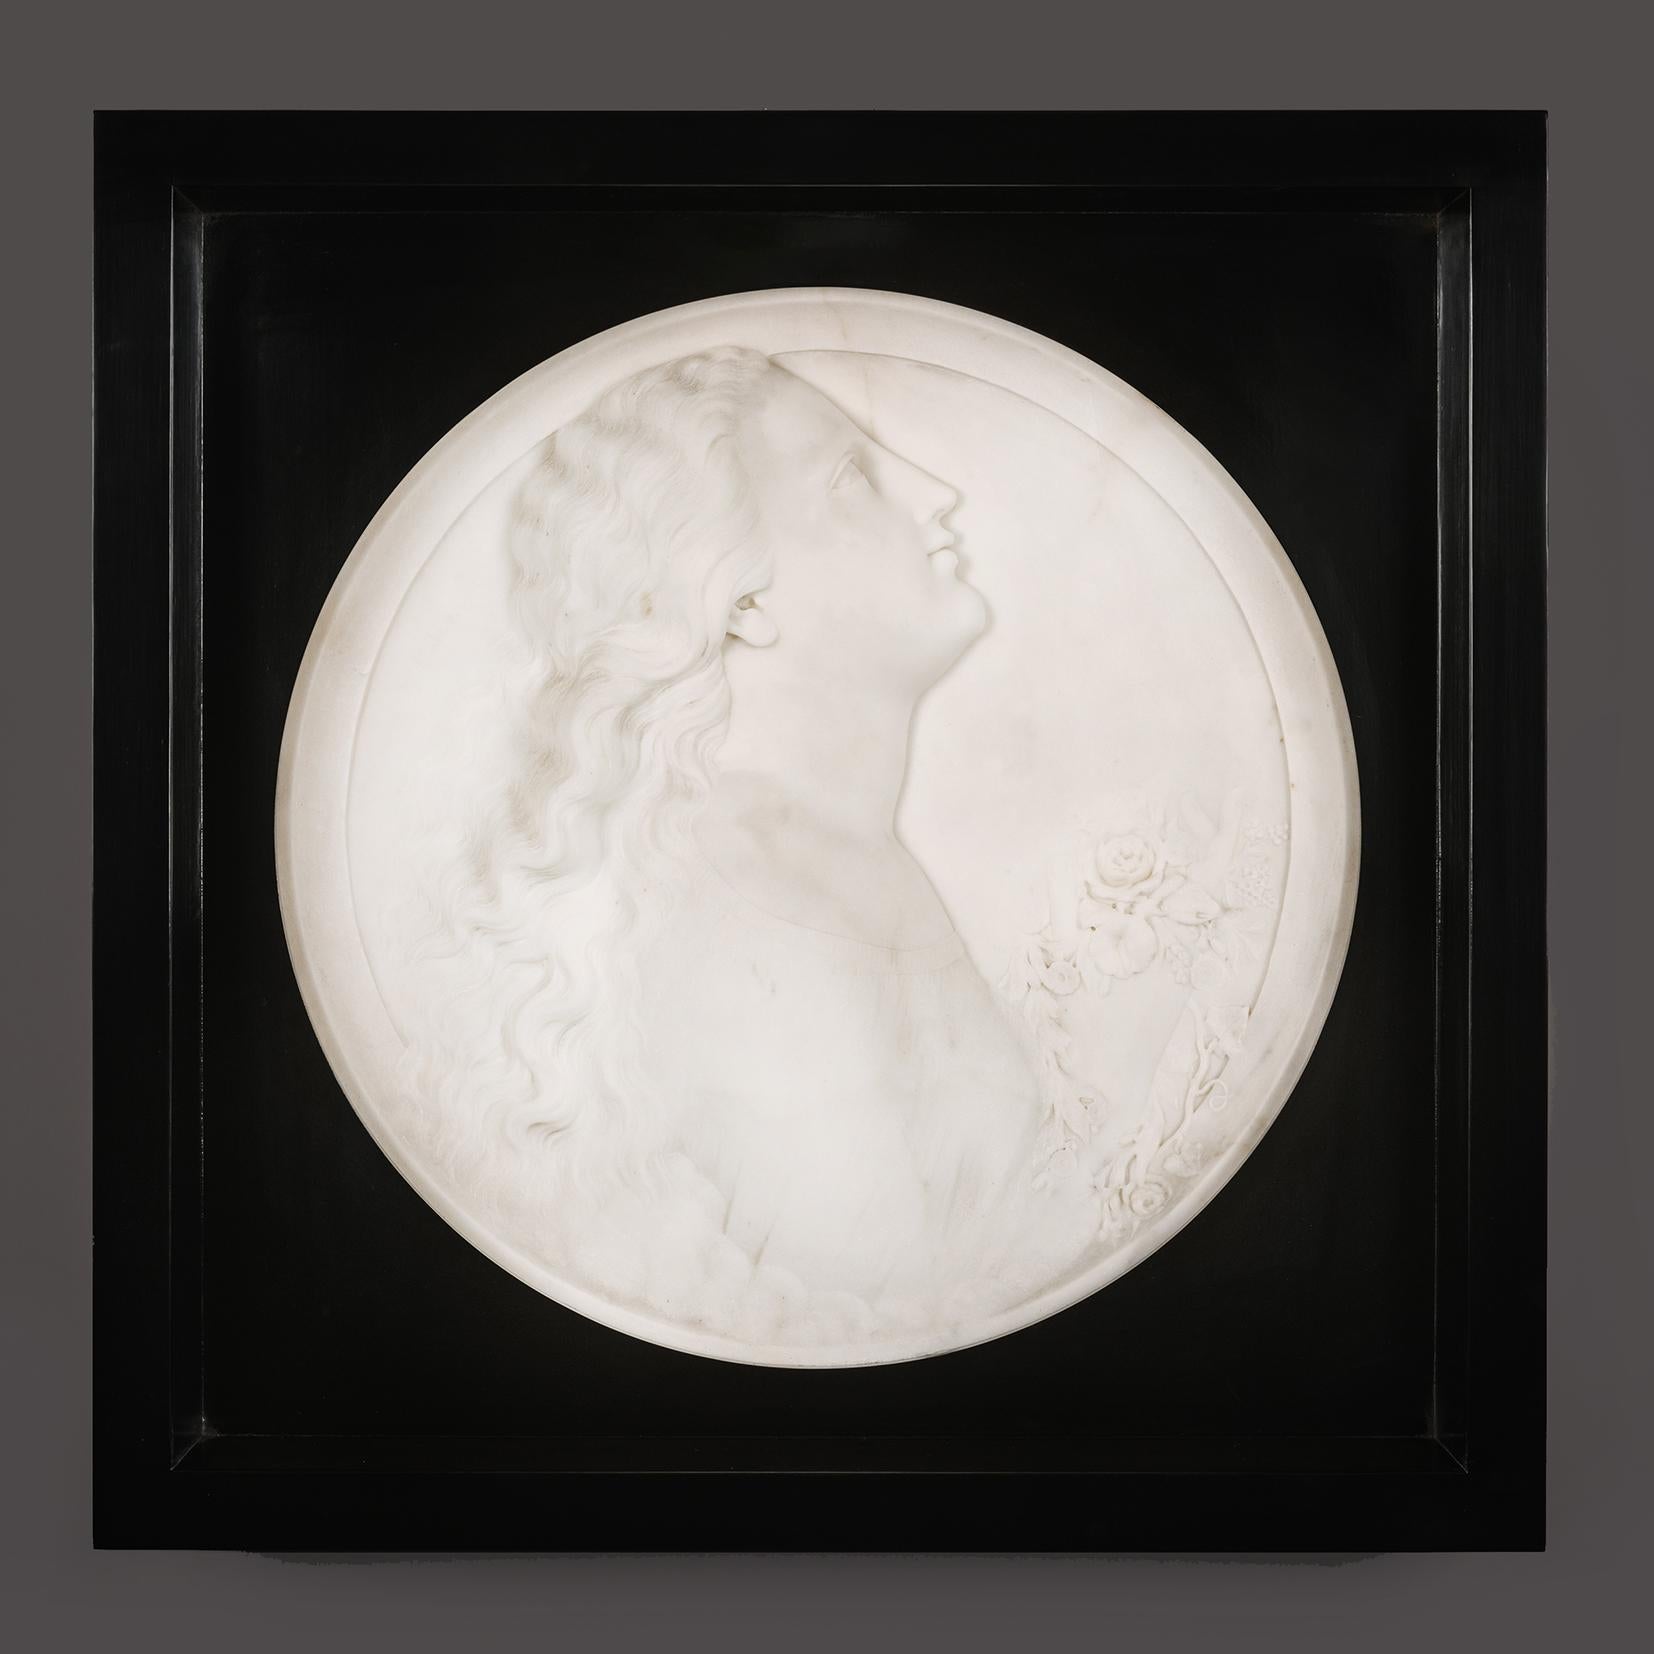 A Pair Of White Marble Portrait Roundels Of Female Portraits Representing 'Morning' and 'Evening', By Madison Colby (American, 1842-1871).

White statuary marble.

'Morning' signed ’M. Colby’.

Italy, Circa 1868.

These large portrait roundels